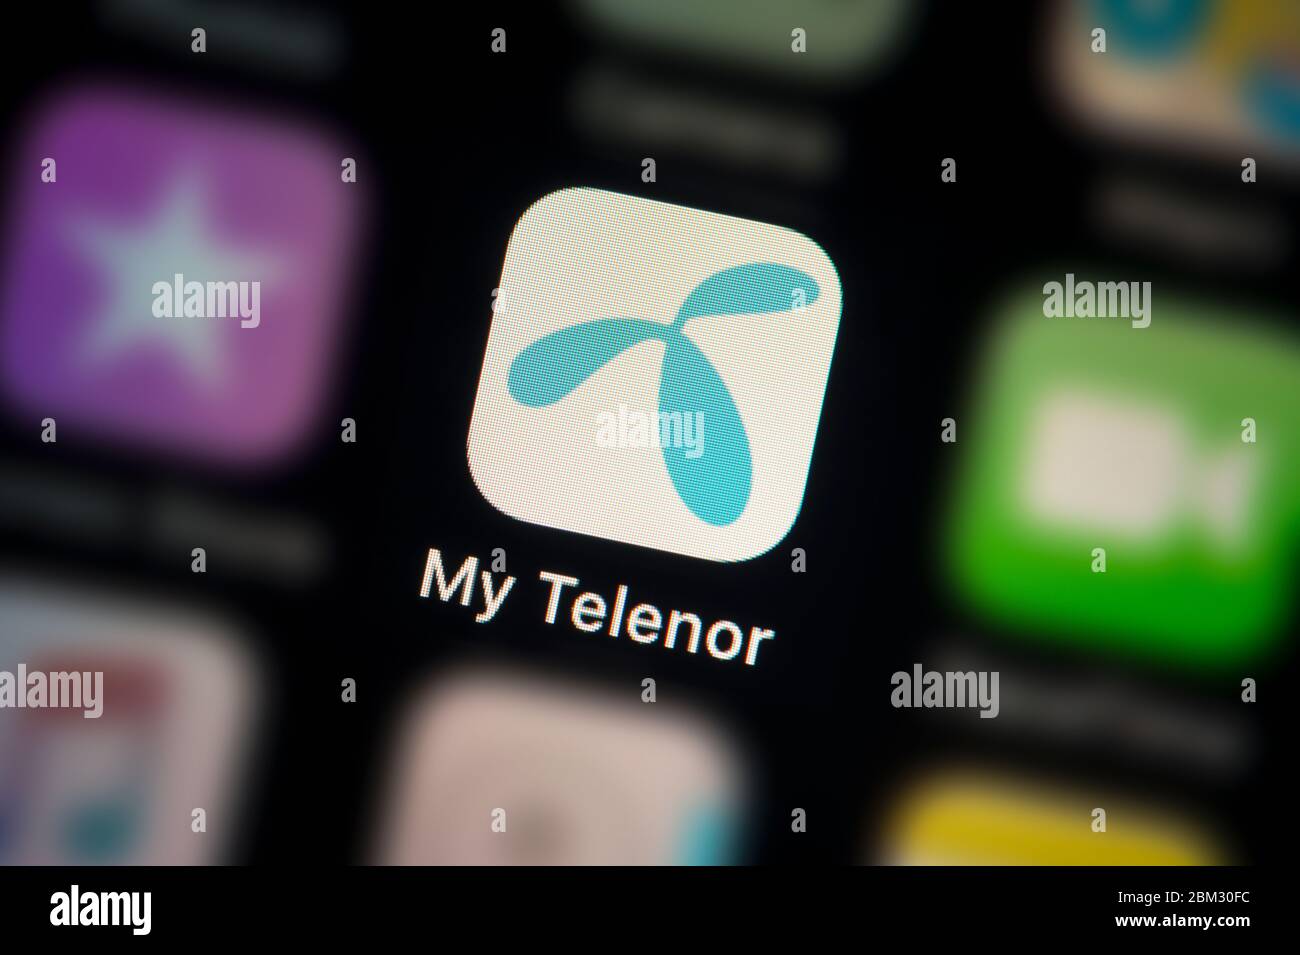 A close-up shot of the Telenor app icon, as seen on the screen of a smart phone (Editorial use only) Stock Photo